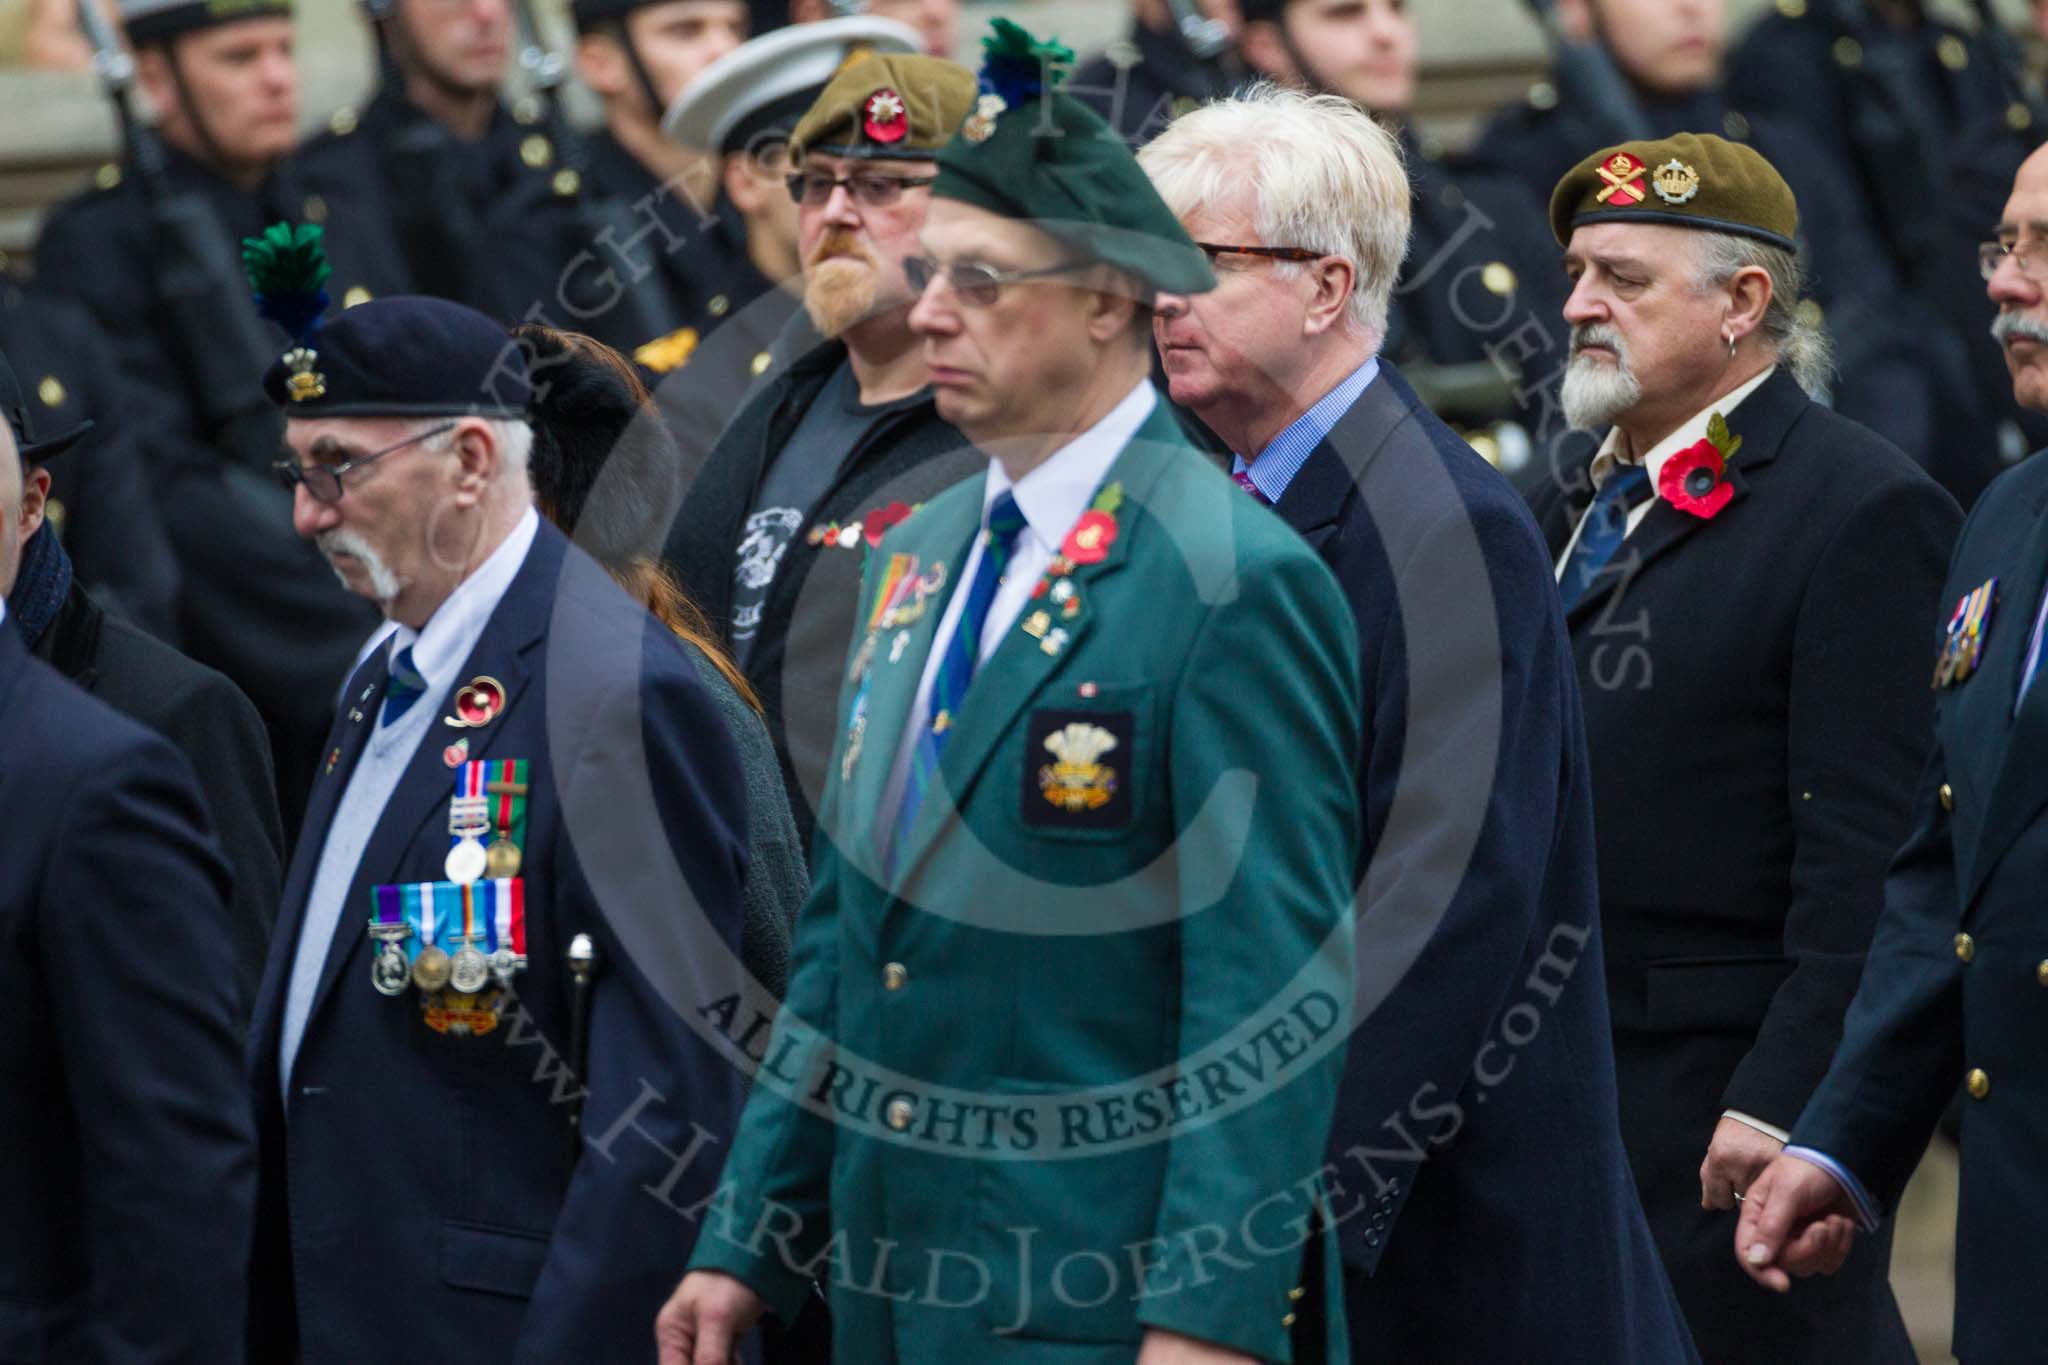 Remembrance Sunday at the Cenotaph 2015: Group D5, North Irish Horse & Irish Regiments Old Comrades
Association.
Cenotaph, Whitehall, London SW1,
London,
Greater London,
United Kingdom,
on 08 November 2015 at 11:52, image #615